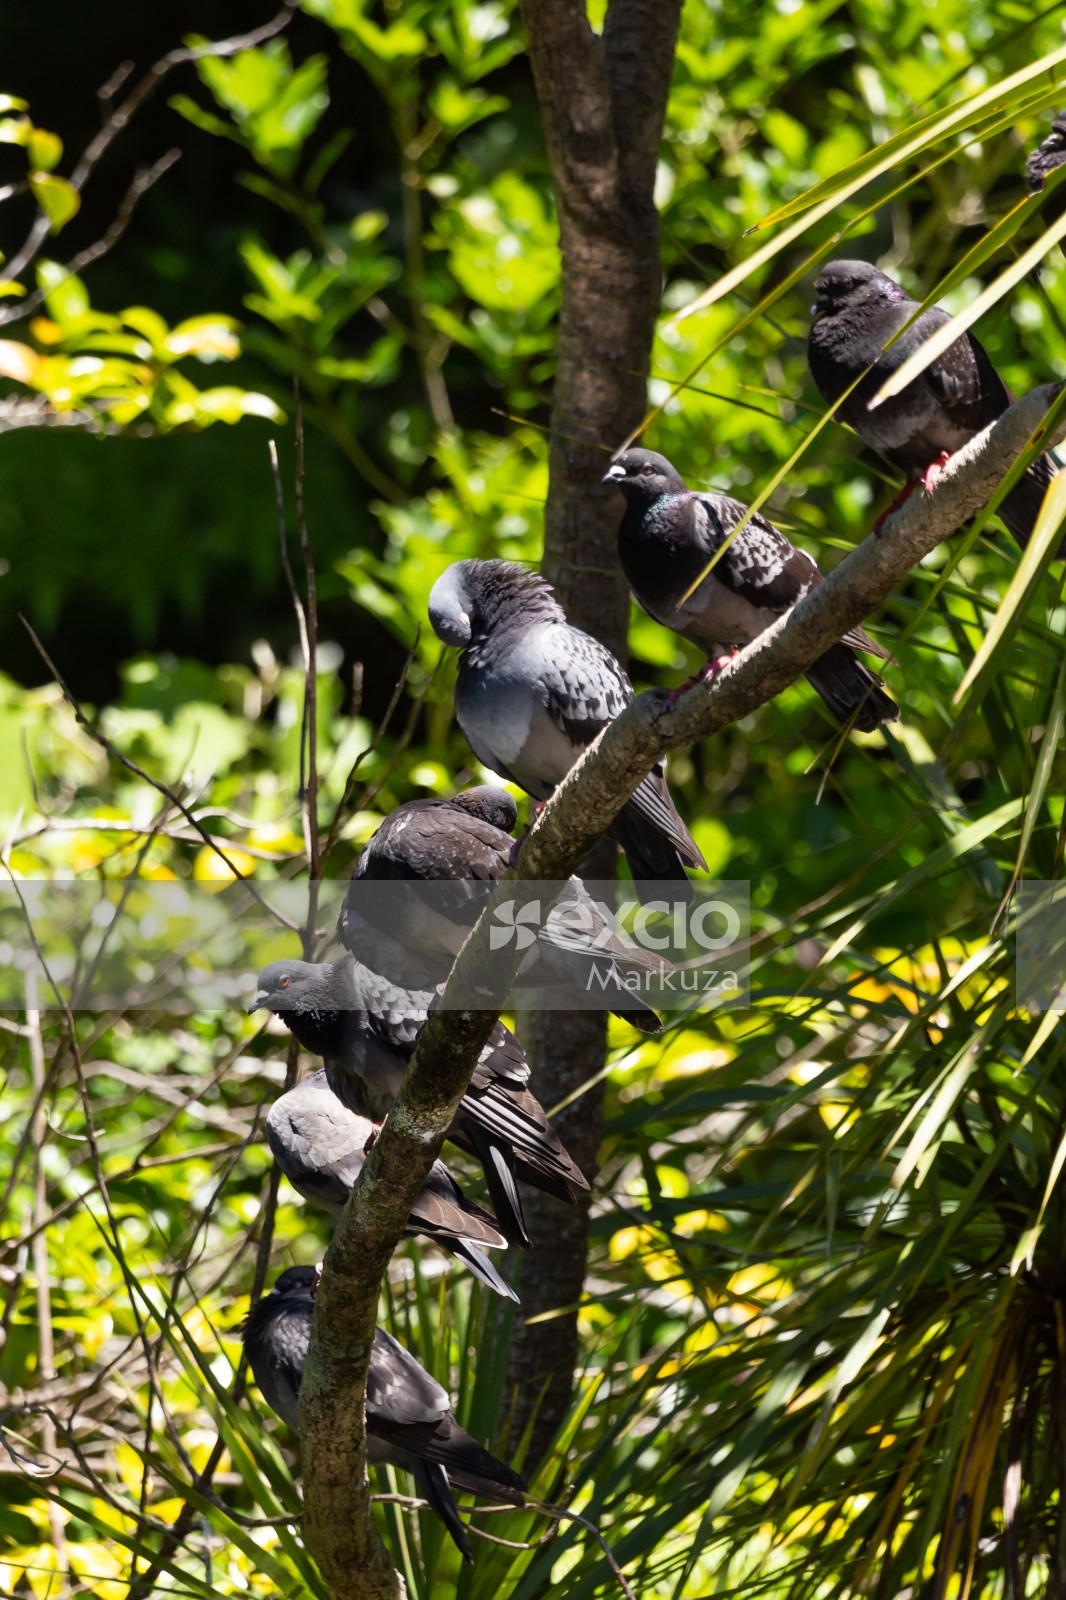 A branch full of pigeons